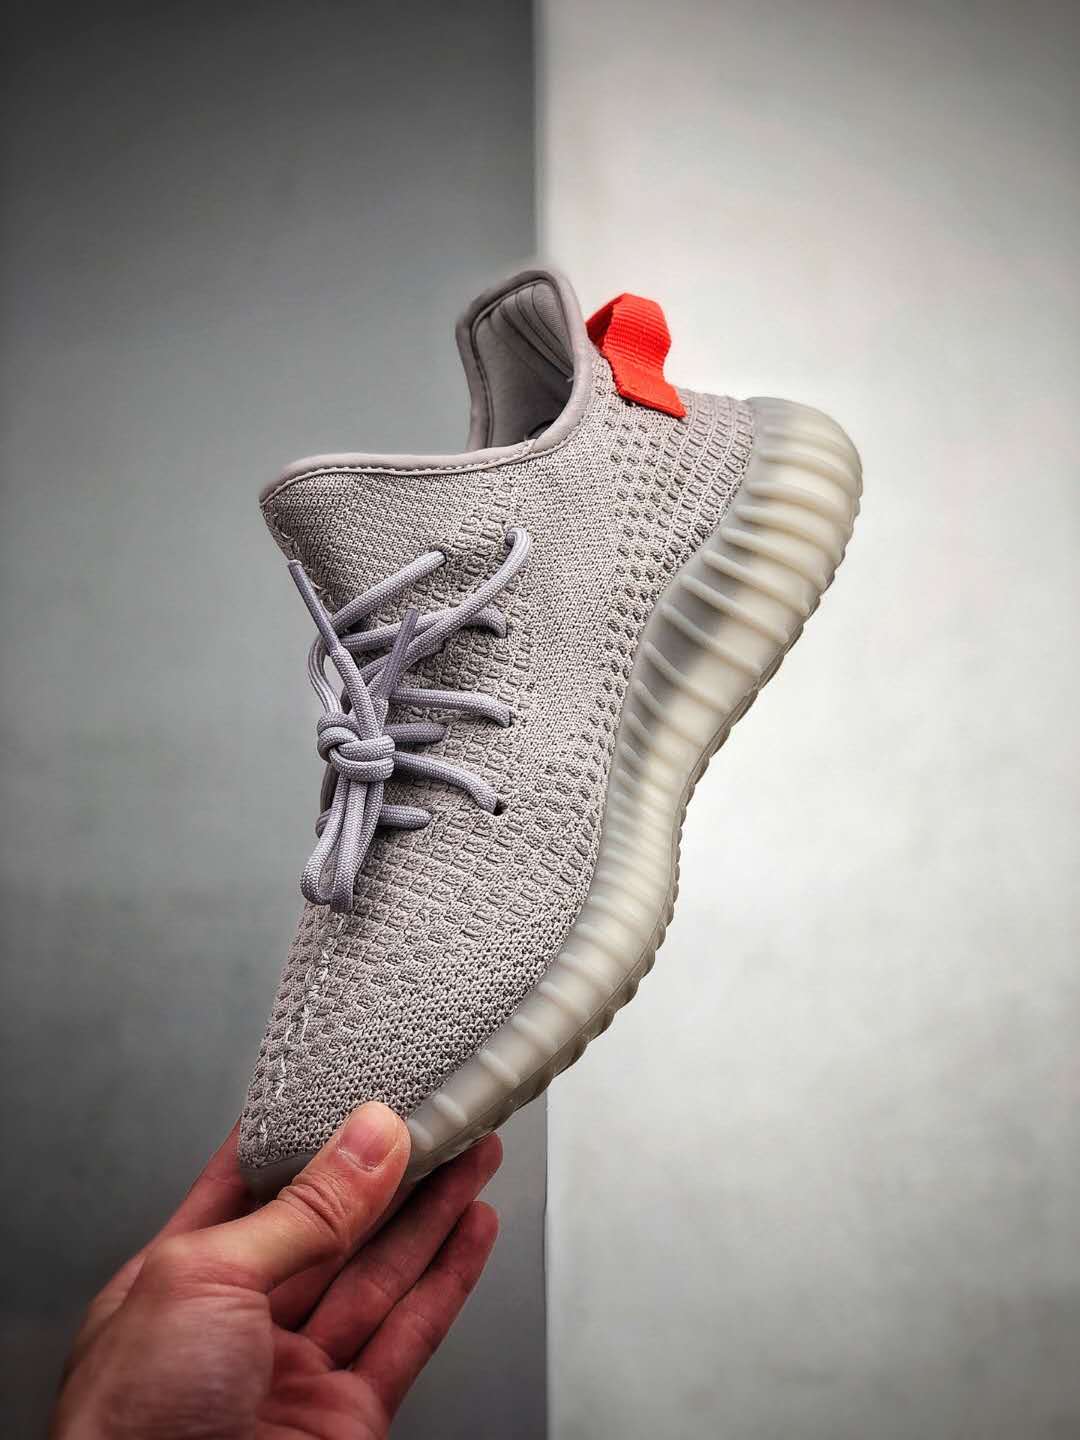 Adidas Yeezy Boost 350 V2 Tail Light FX9017 - Authentic Sneakers for Style and Comfort